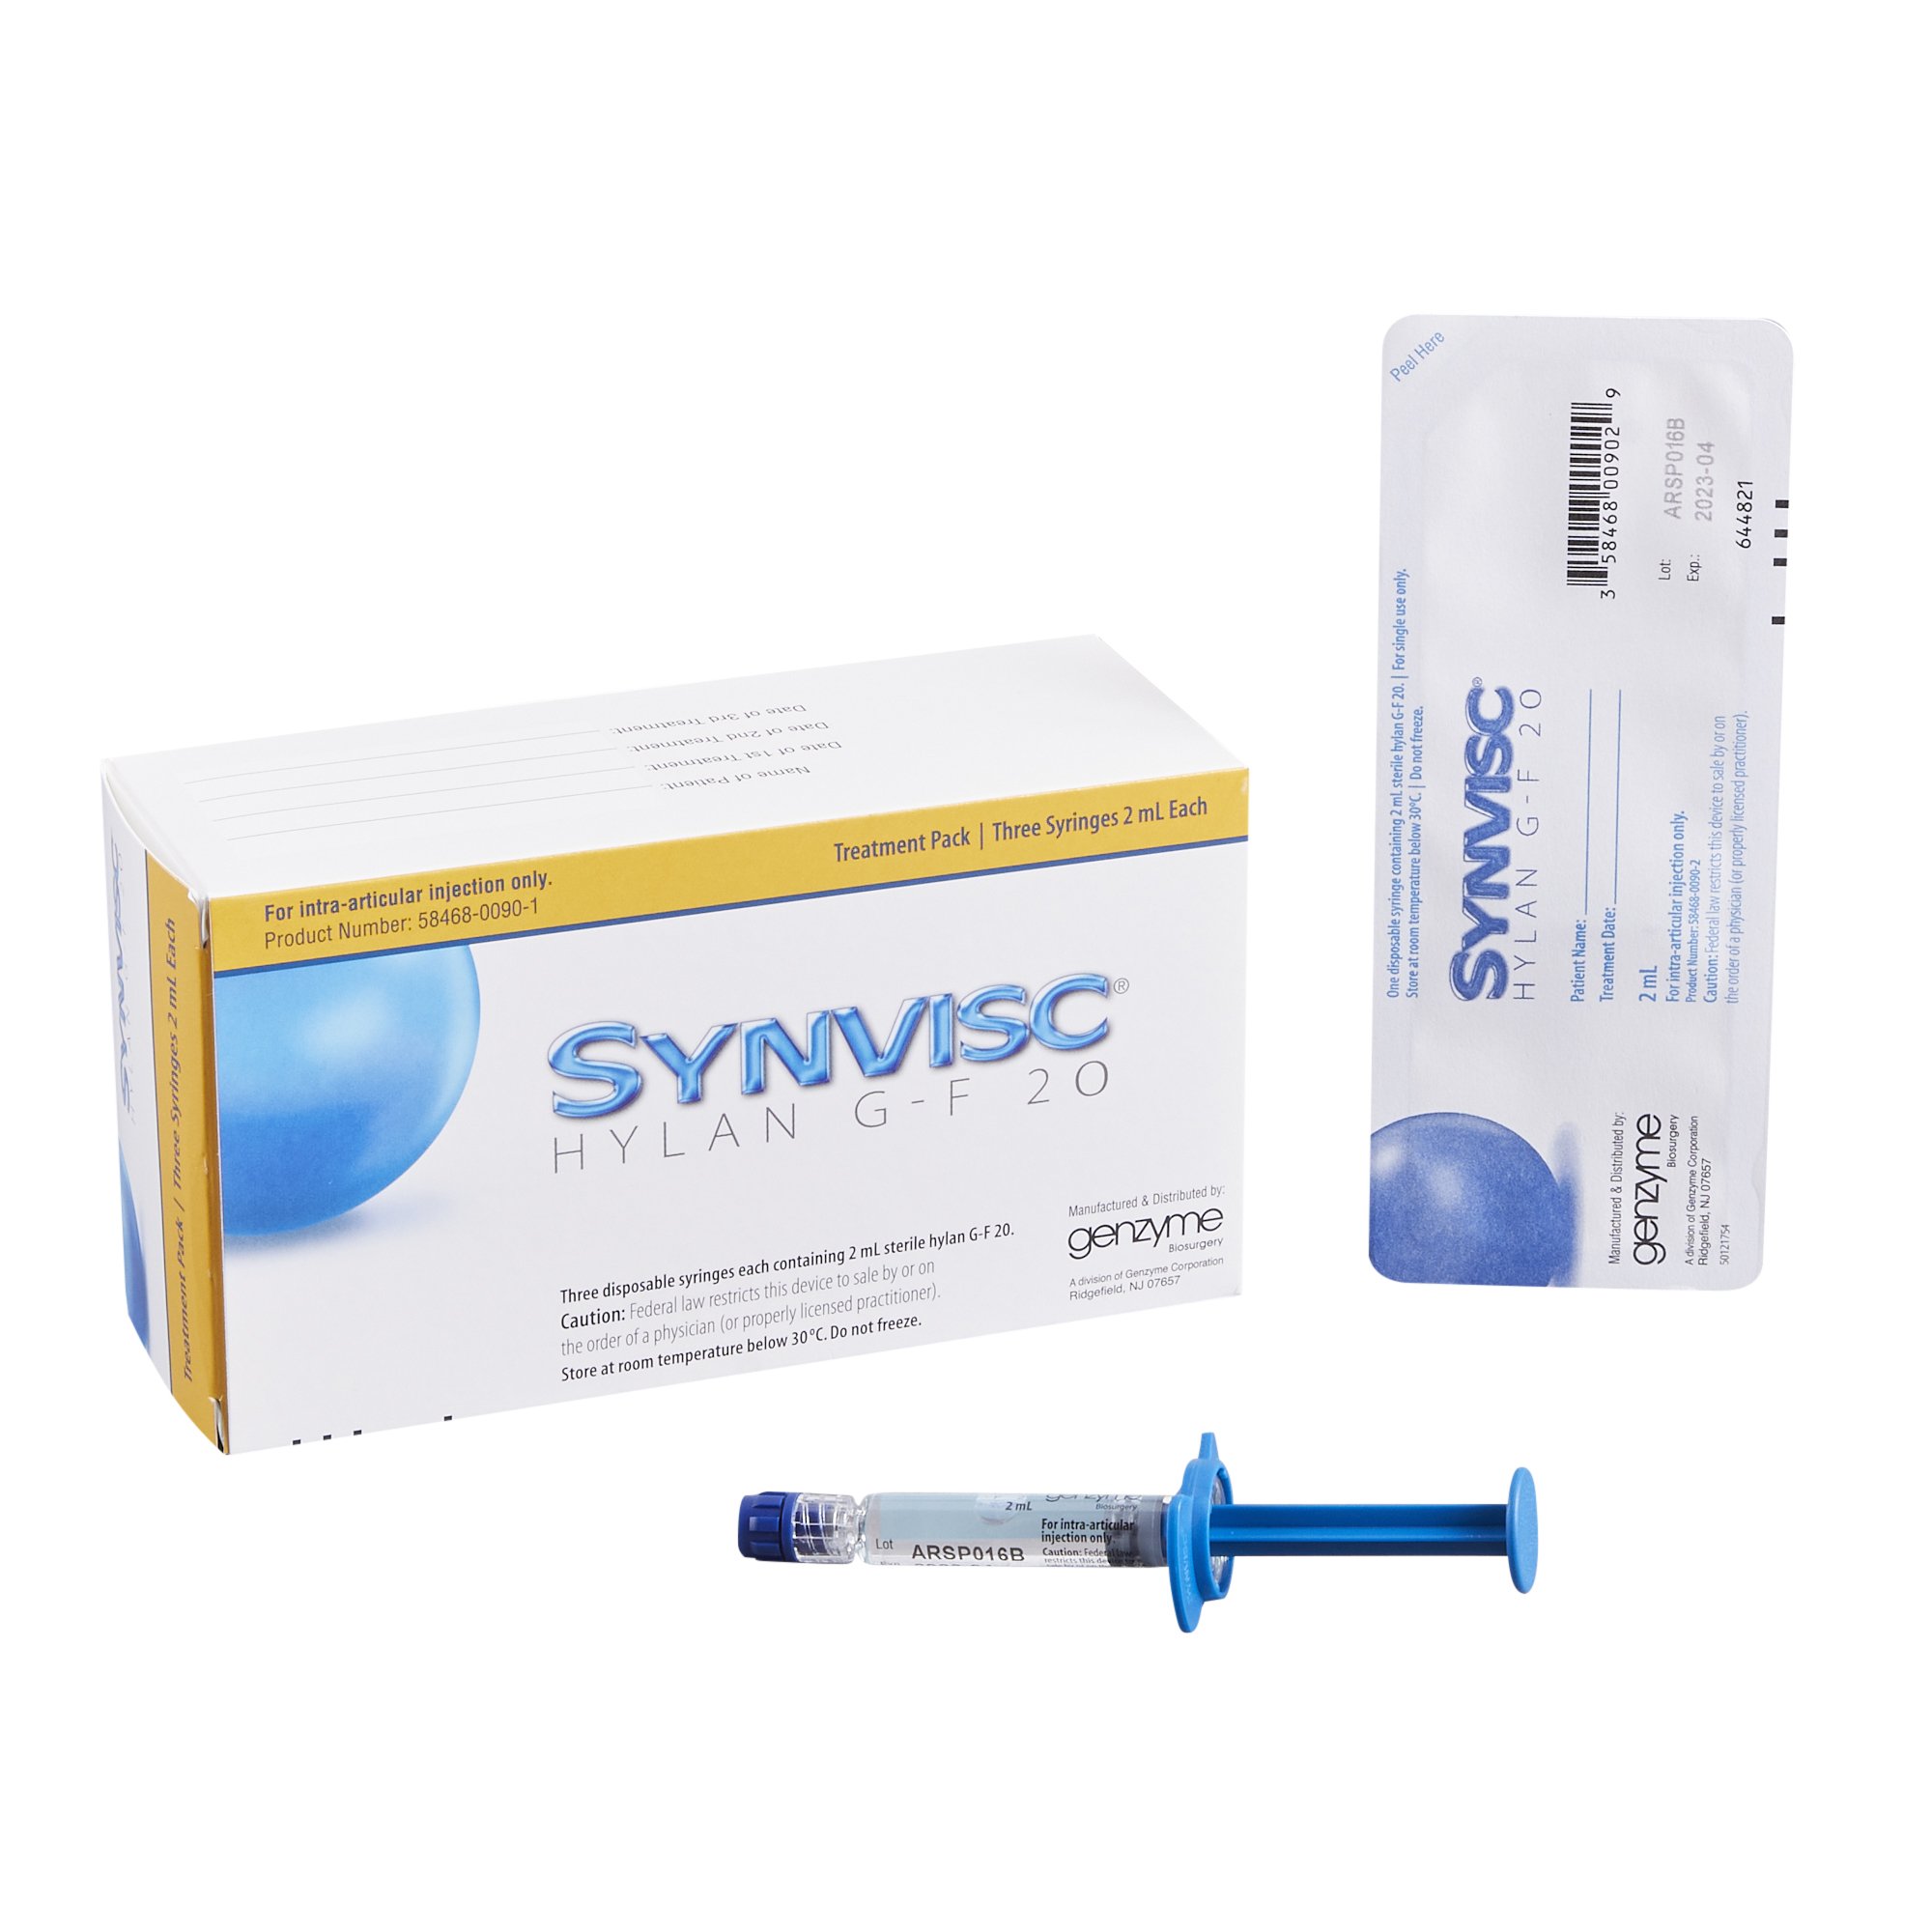 '.Rx Item-Synvisc-One 10ML 6 ML Syringe by.'